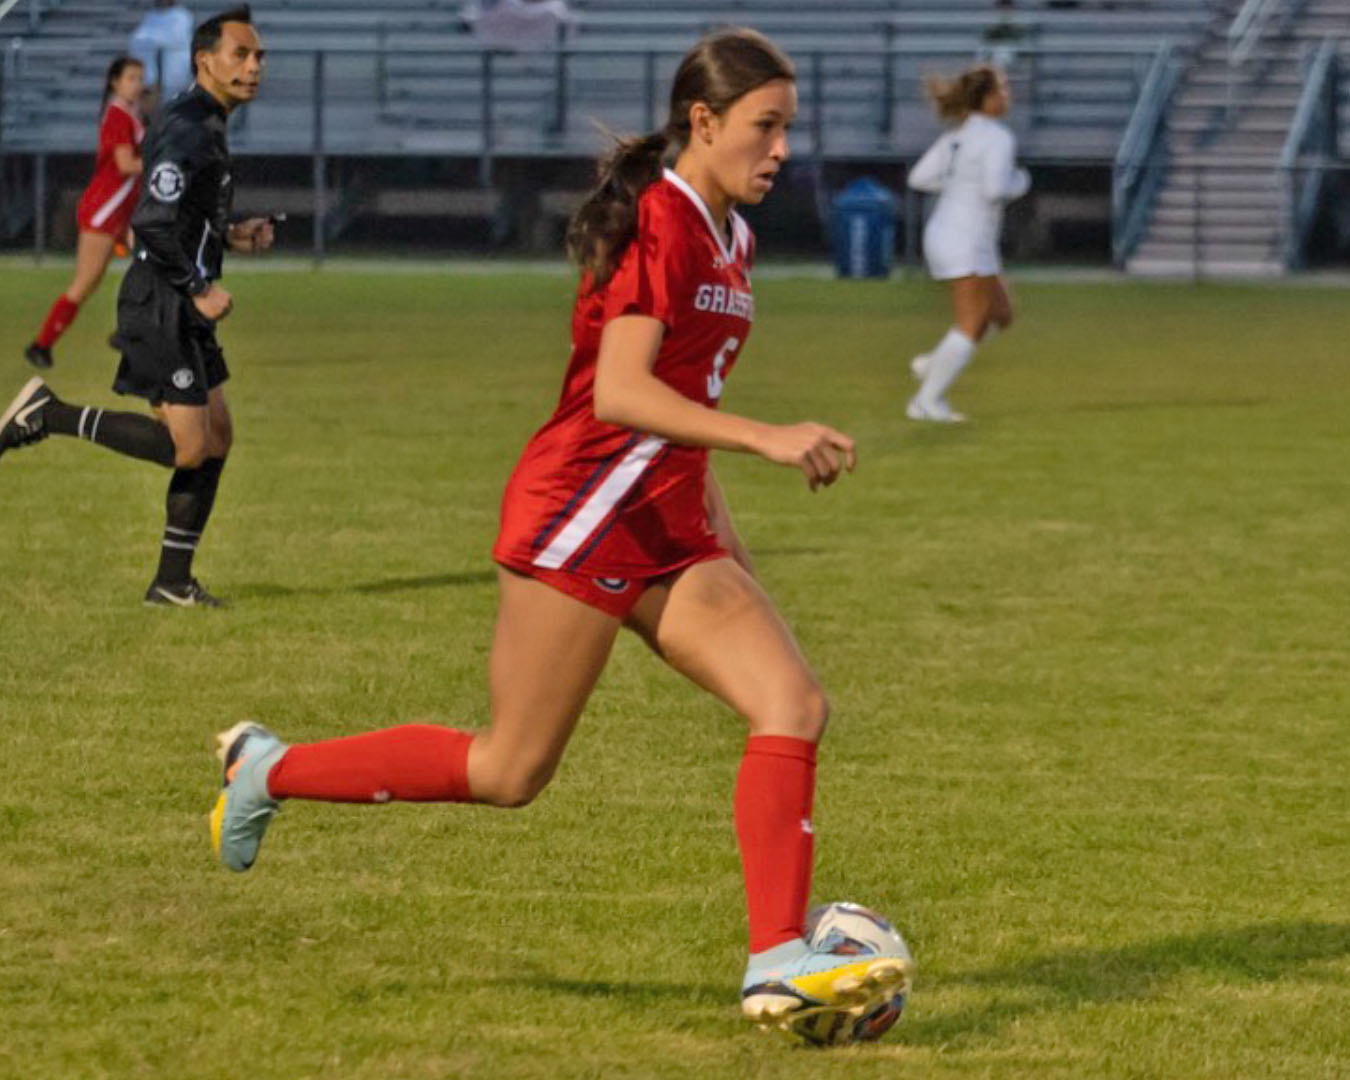 ciera frick drives towards goal with the ball